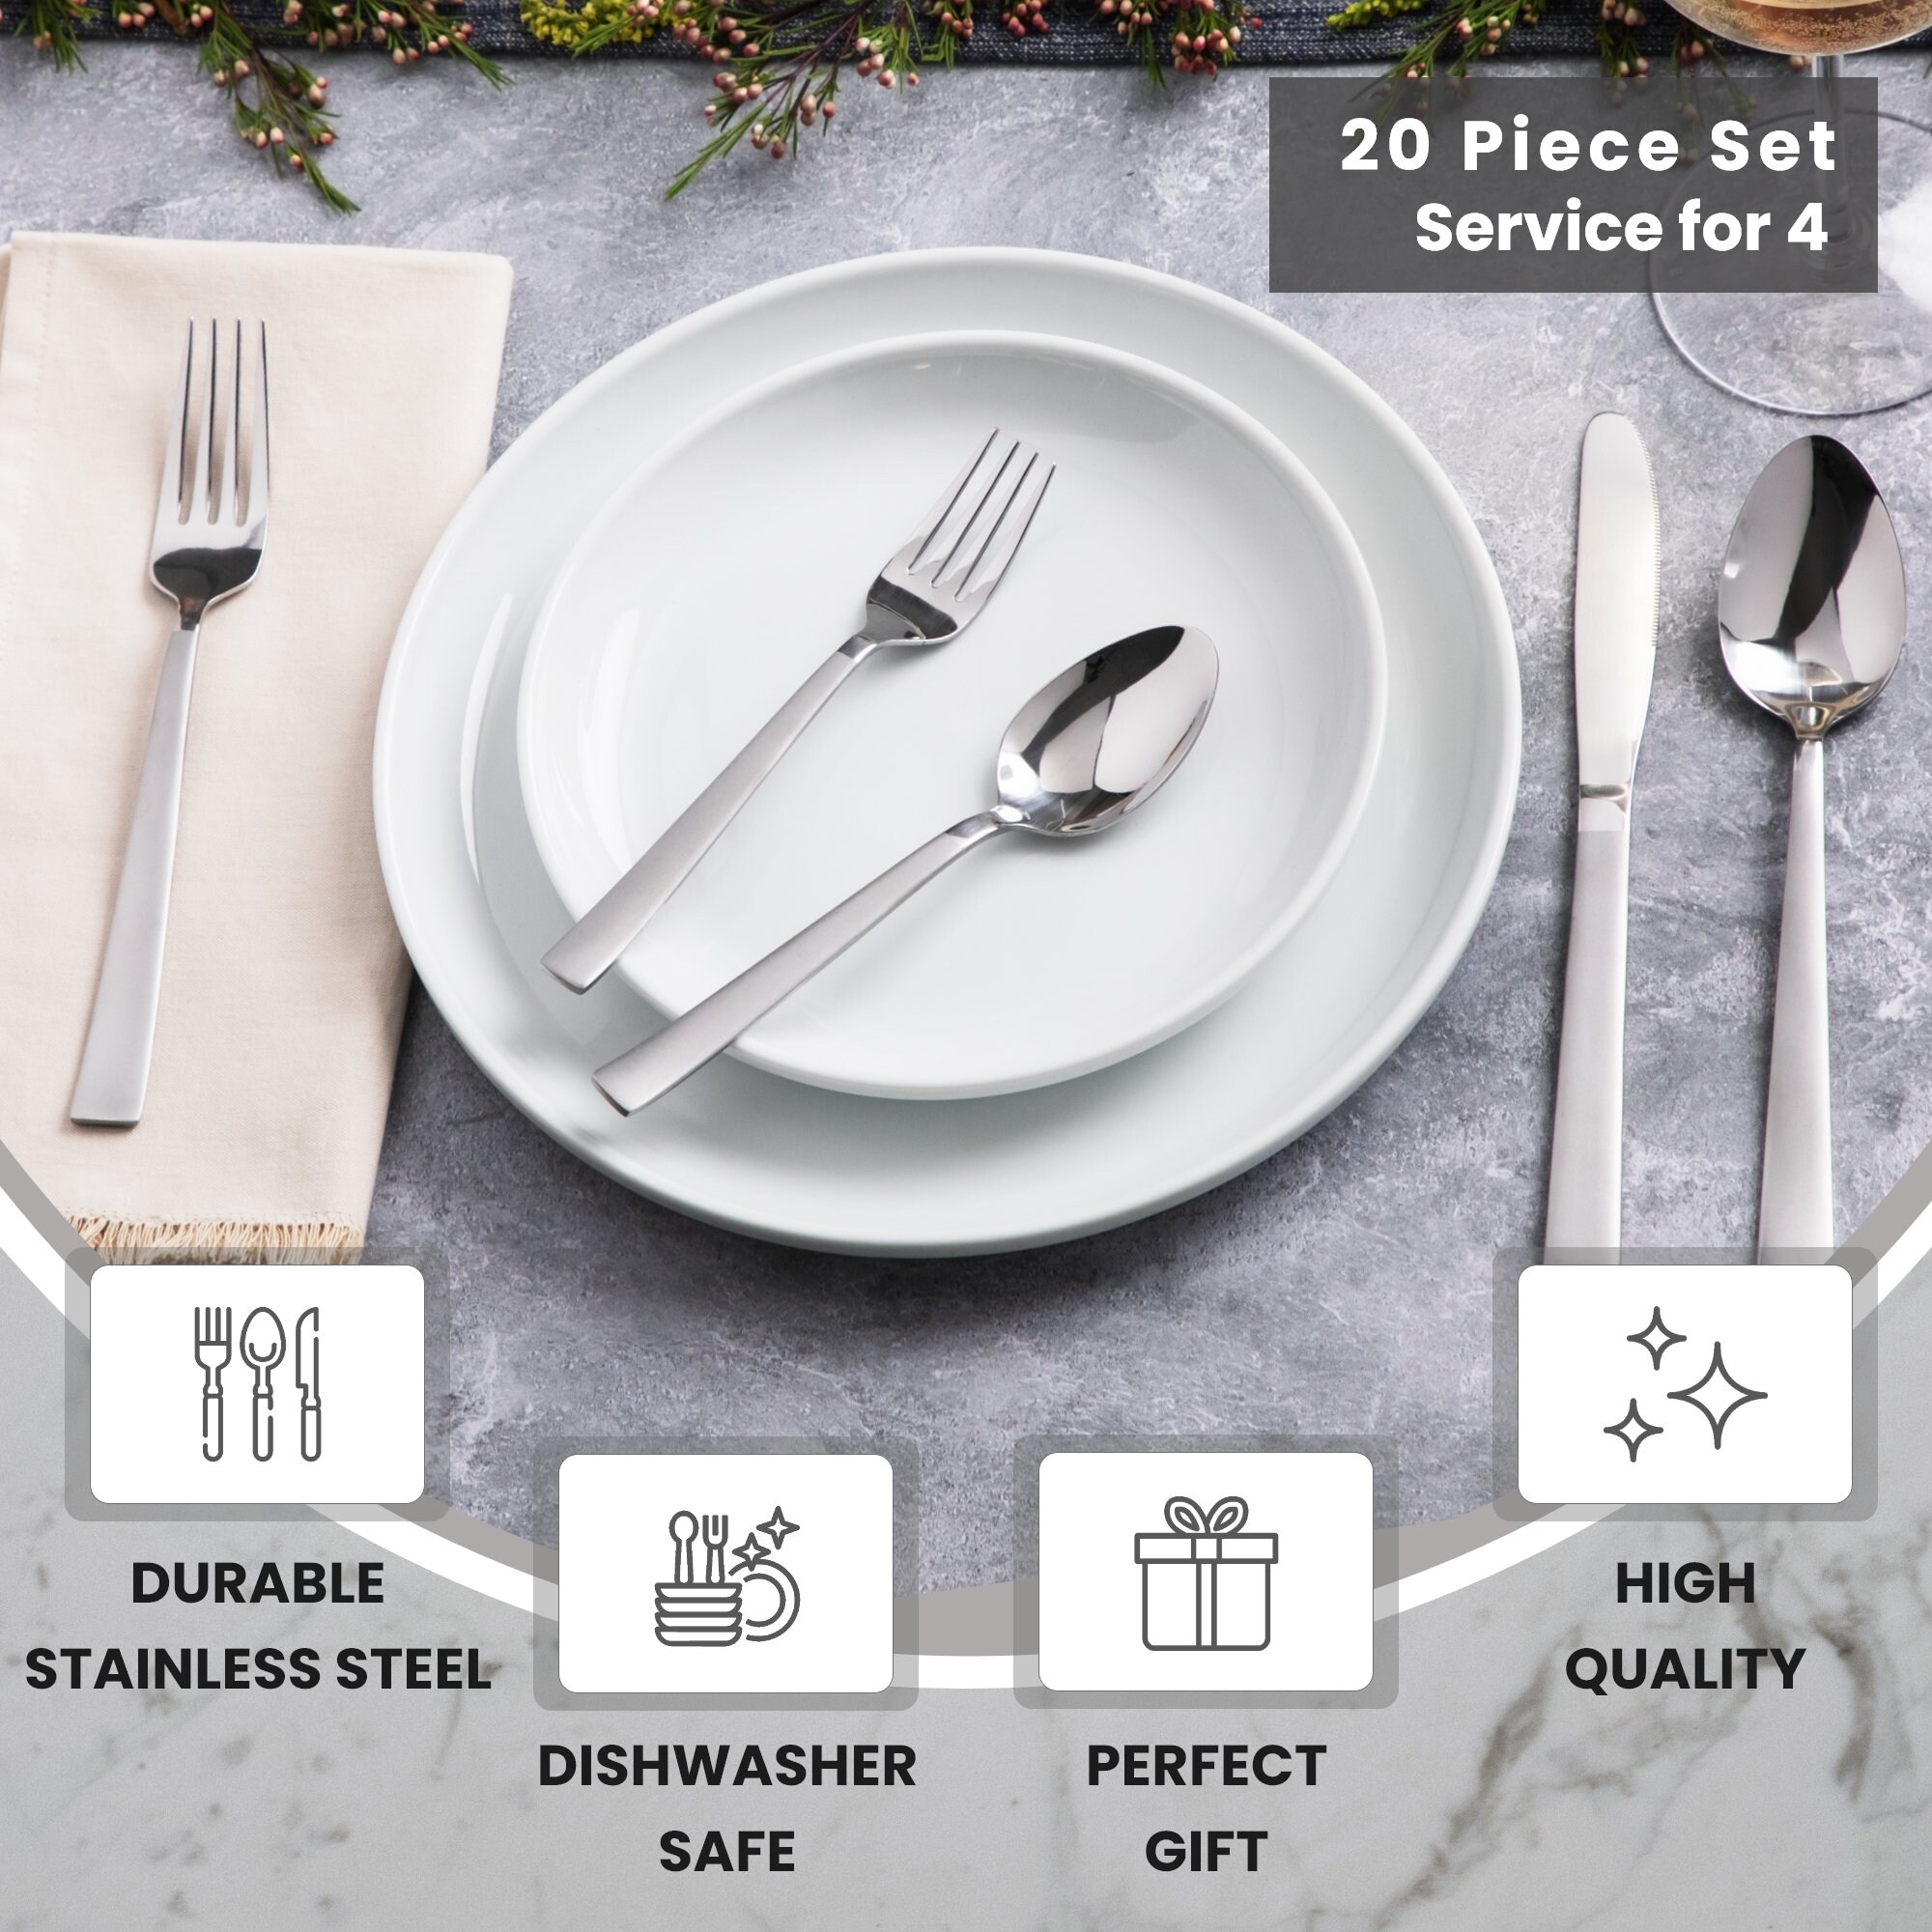 https://ak1.ostkcdn.com/images/products/is/images/direct/0172f8794d726555ba0e7bb0d06502ab09ddd3bc/20-Piece-Silverware-Flatware-Set-Stainless-Steel-Utensils-Cutlery-Set.jpg